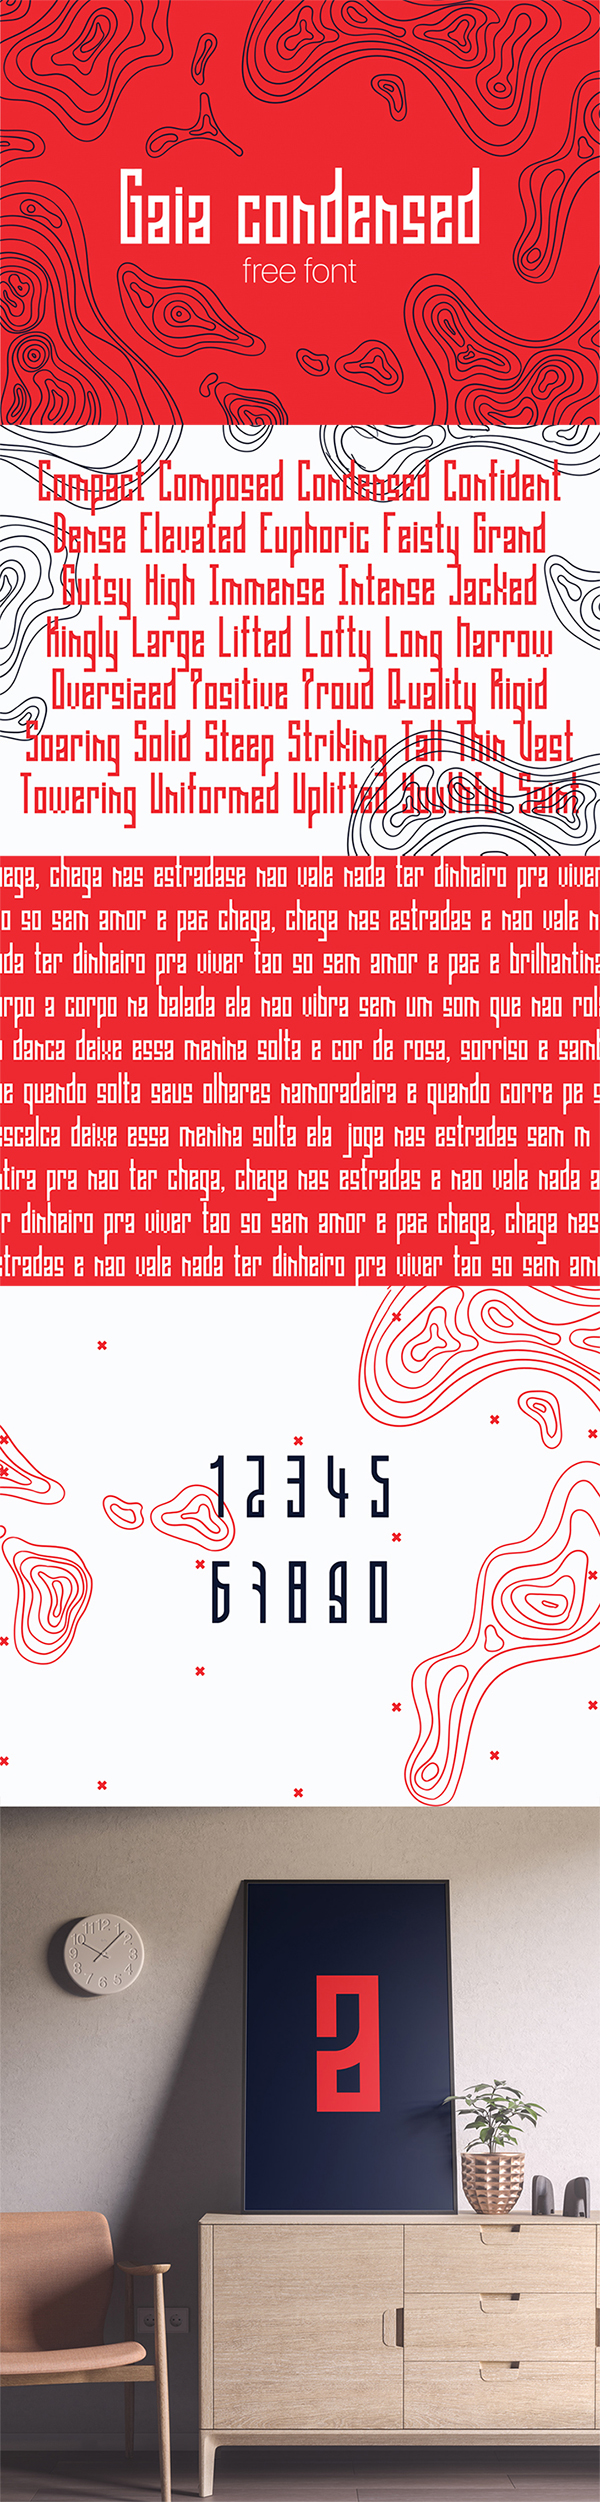 Awesome Gaia Condensed Display Free Font